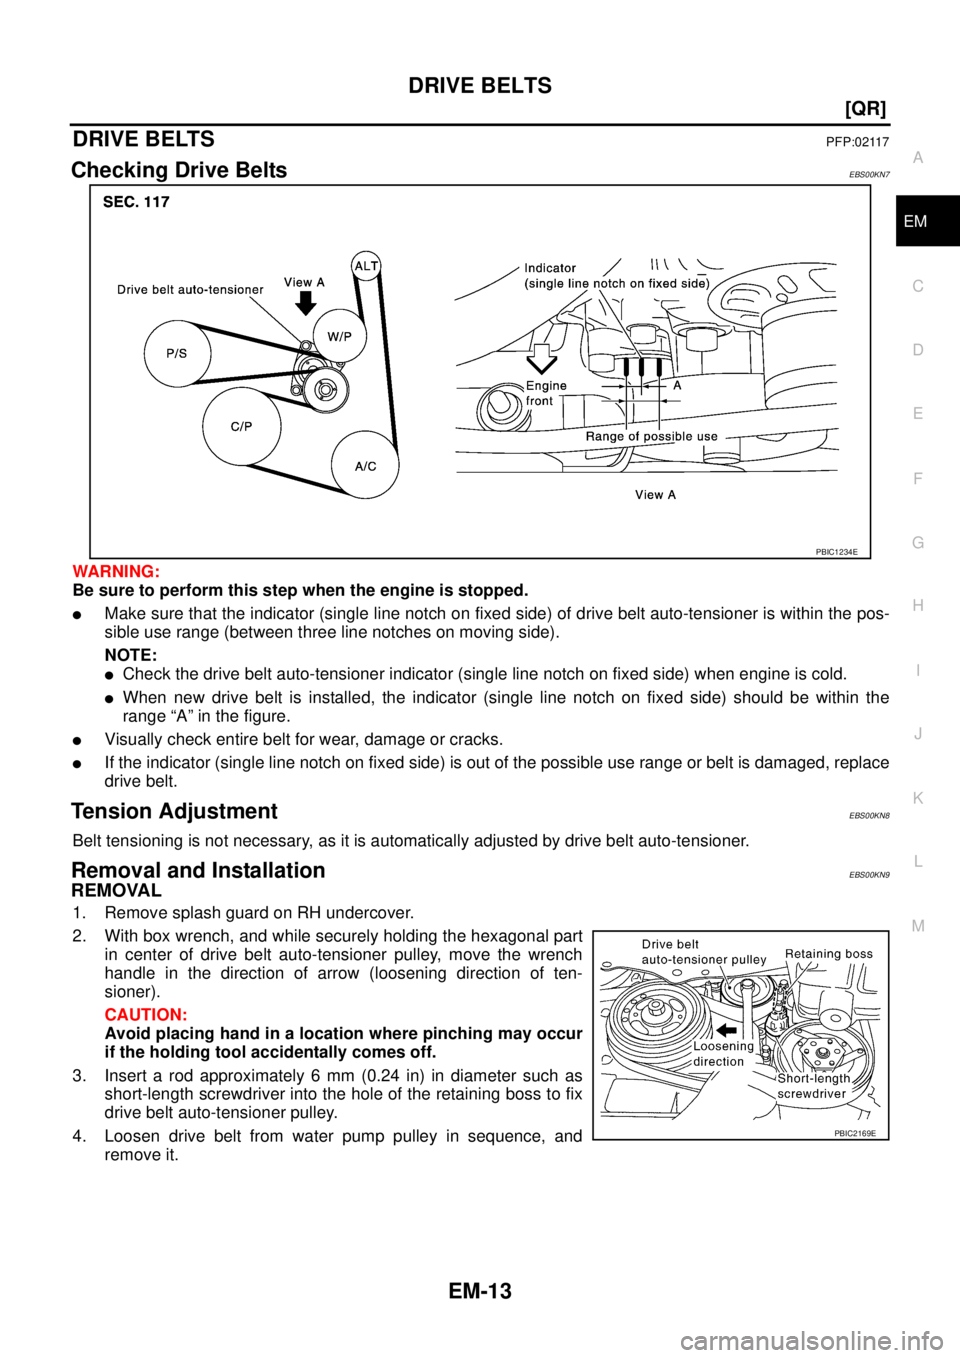 NISSAN X-TRAIL 2003  Service Repair Manual DRIVE BELTS
EM-13
[QR]
C
D
E
F
G
H
I
J
K
L
MA
EM
 
DRIVE BELTSPFP:02117
Checking Drive BeltsEBS00KN7
WARNING:
Be sure to perform this step when the engine is stopped.
Make sure that the indicator (si